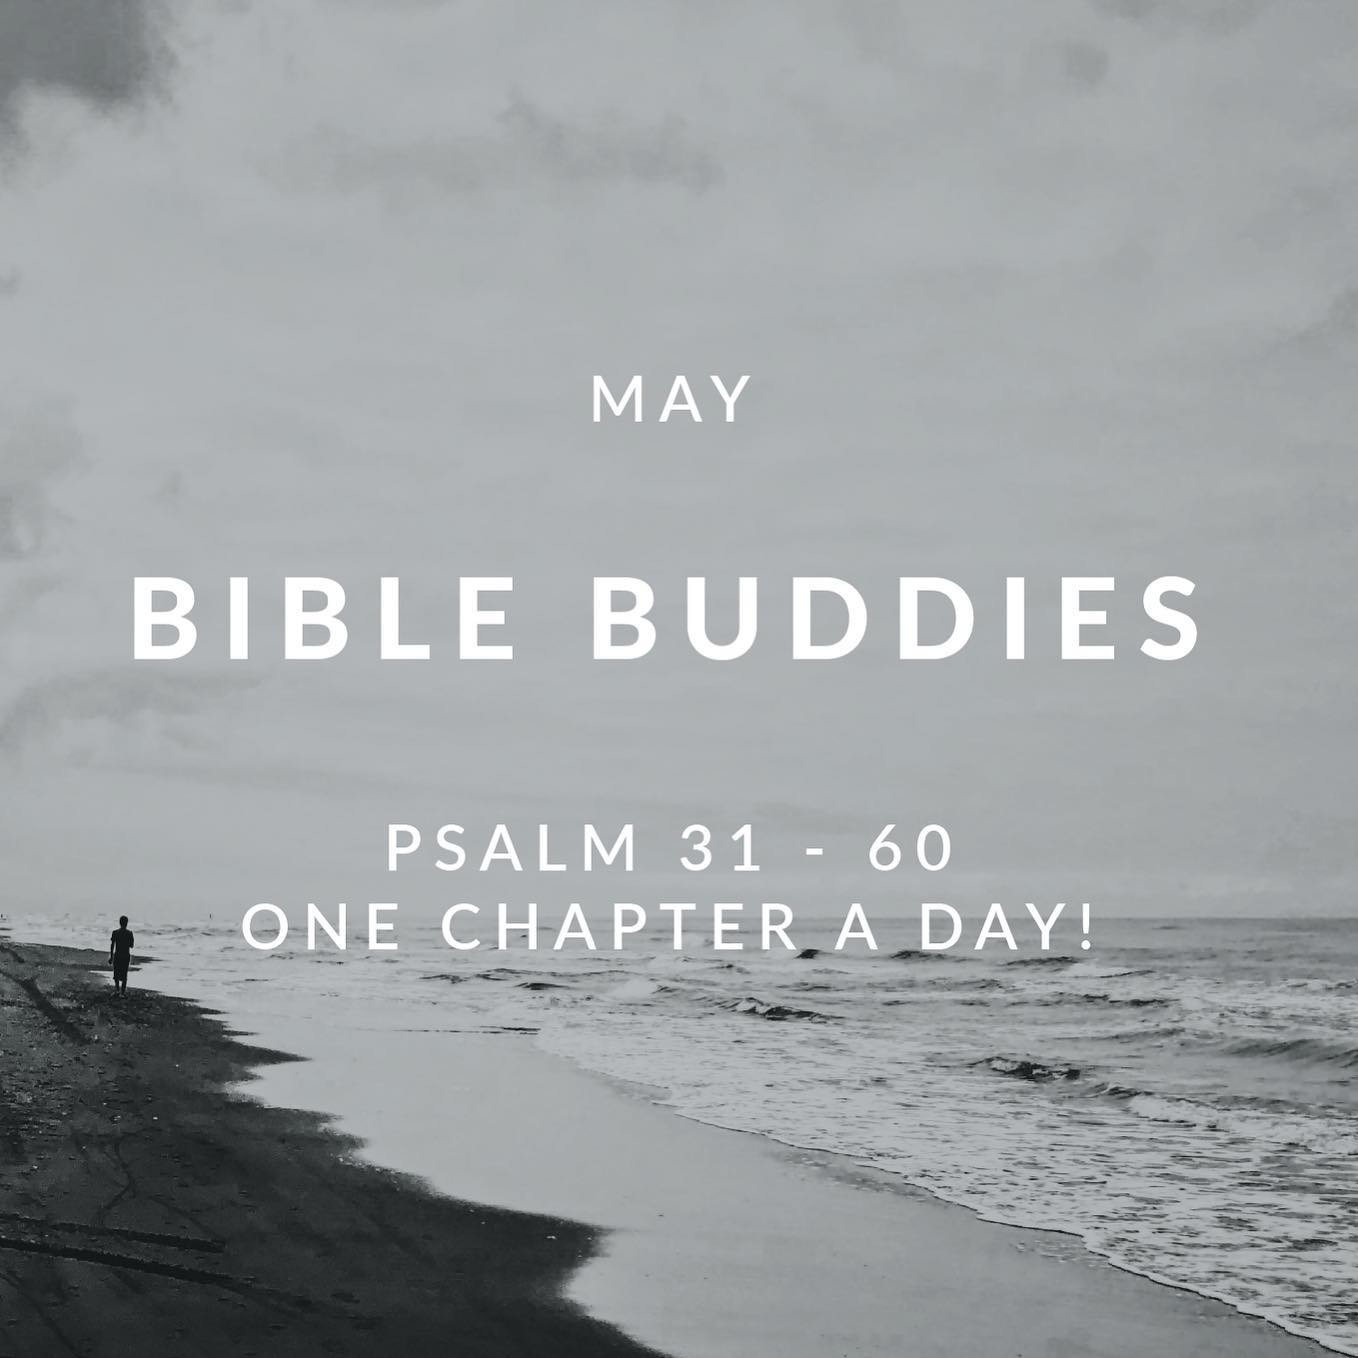 Bible Buddies for this month is going through Psalms! It&rsquo;s not too late to find a buddy and read together! ❤️